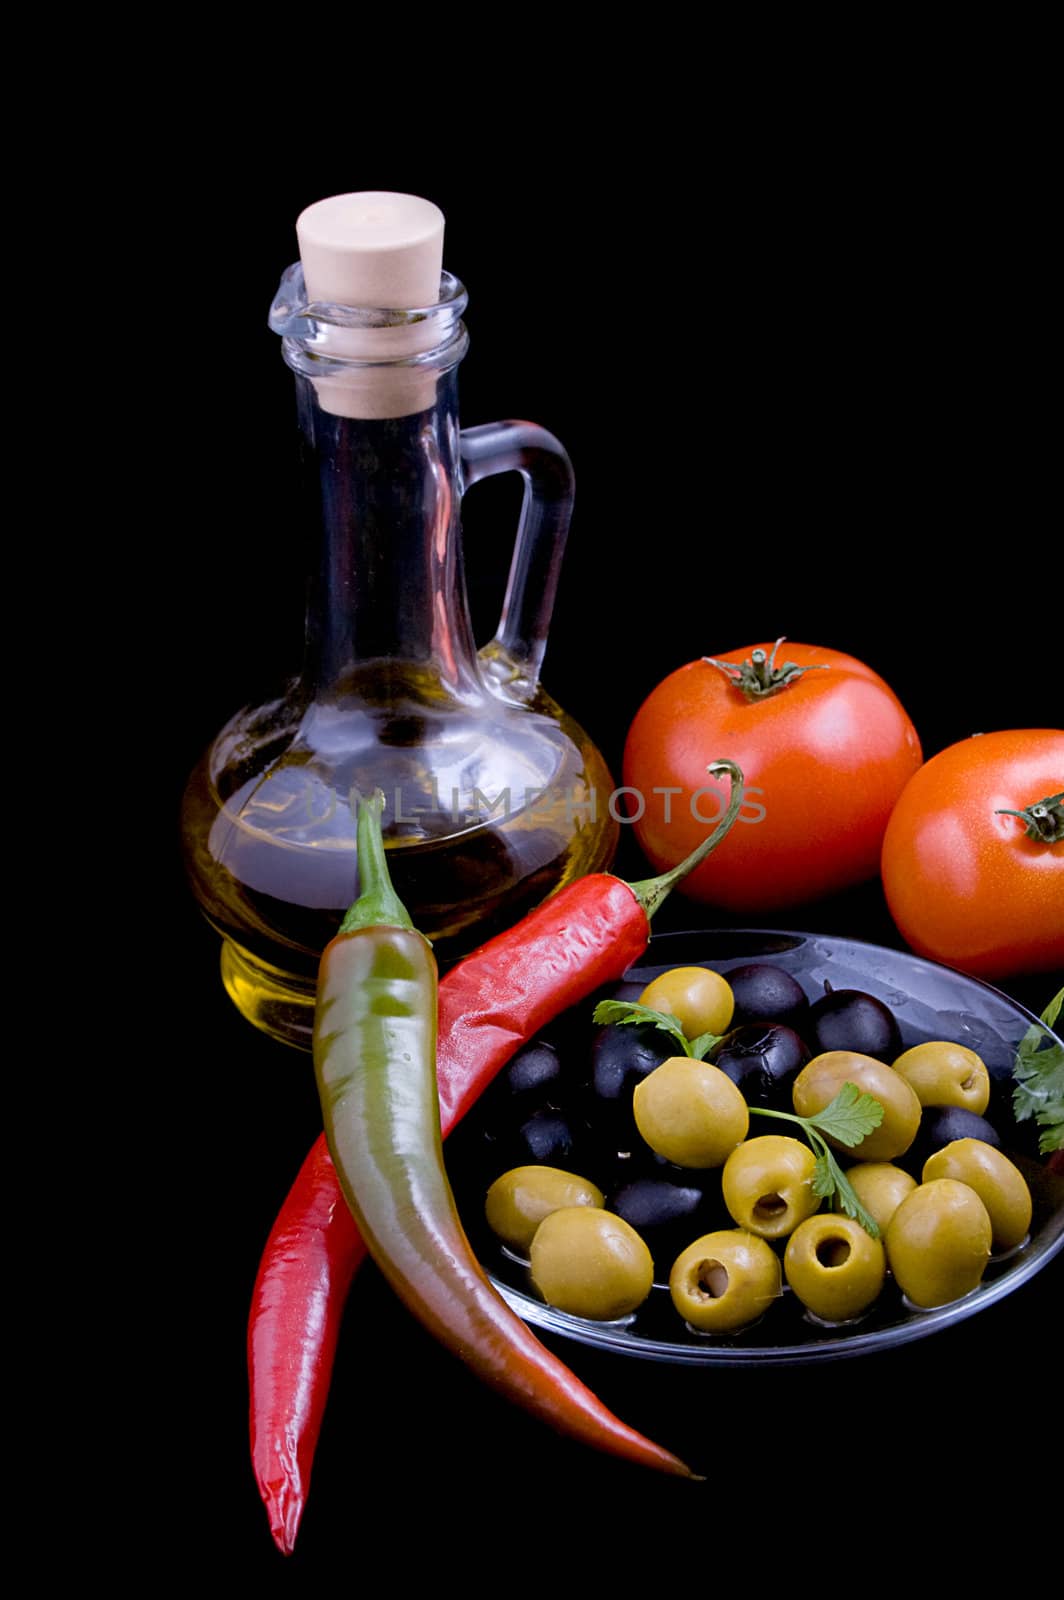 Olive oil, tomatoes, pepper and greens isolated on black